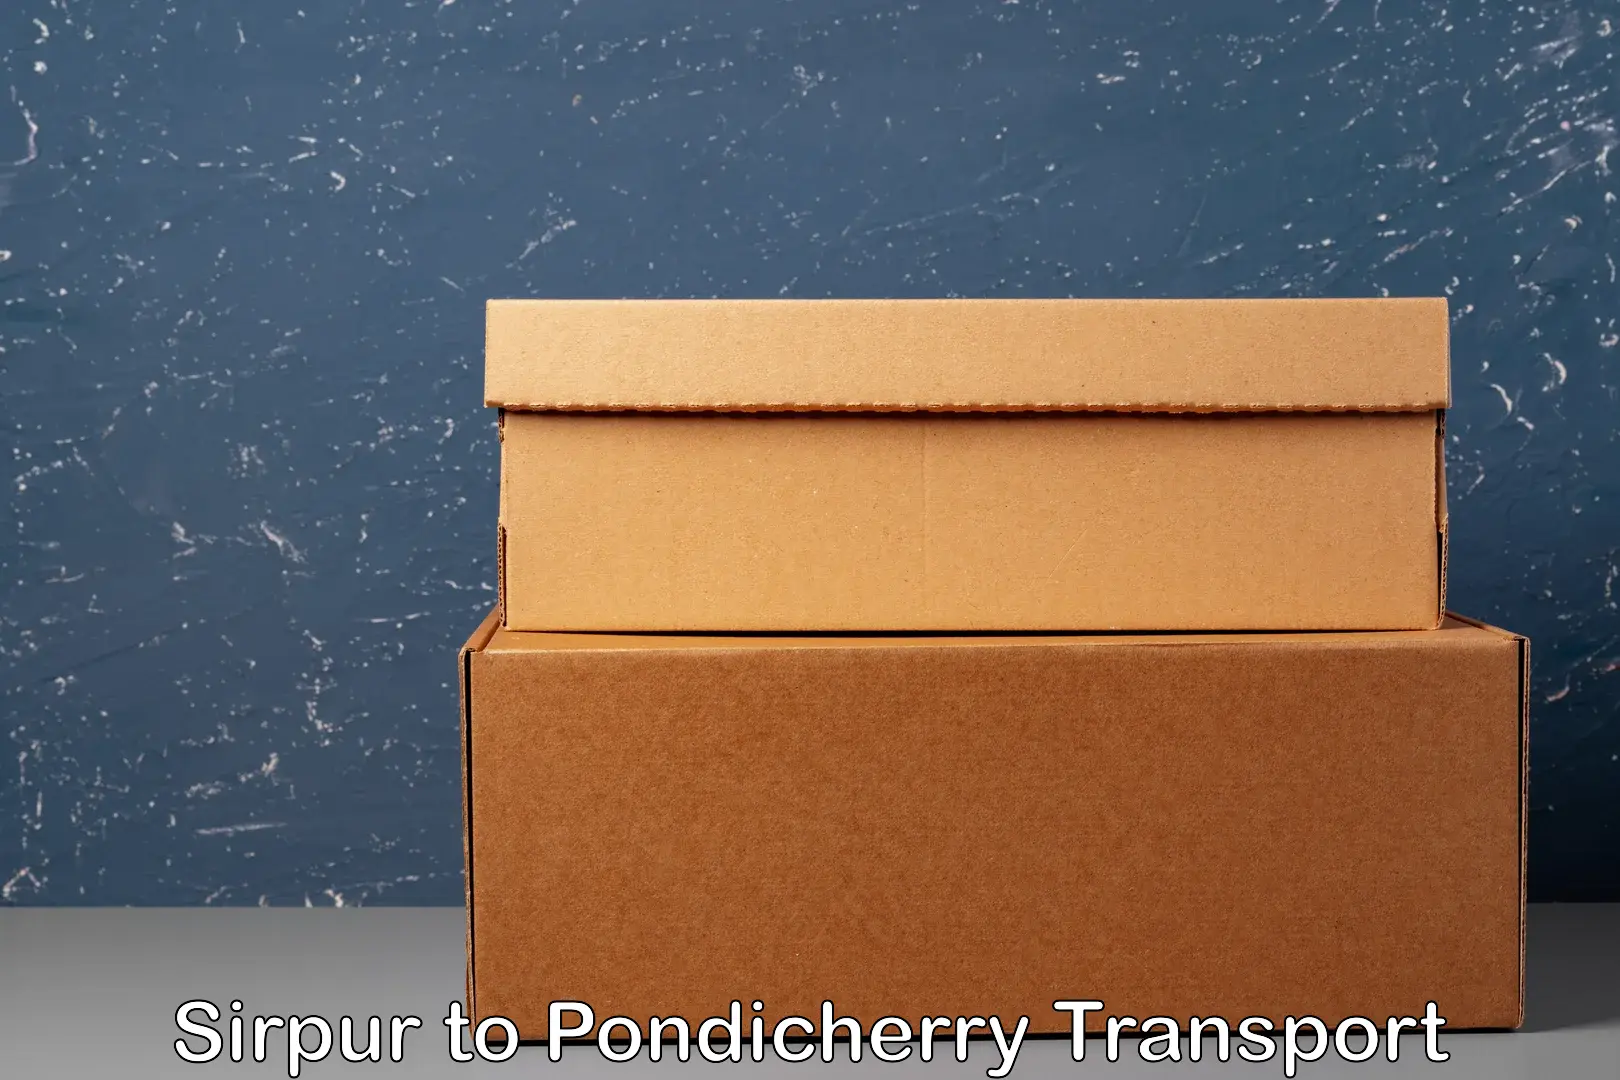 Package delivery services Sirpur to Pondicherry